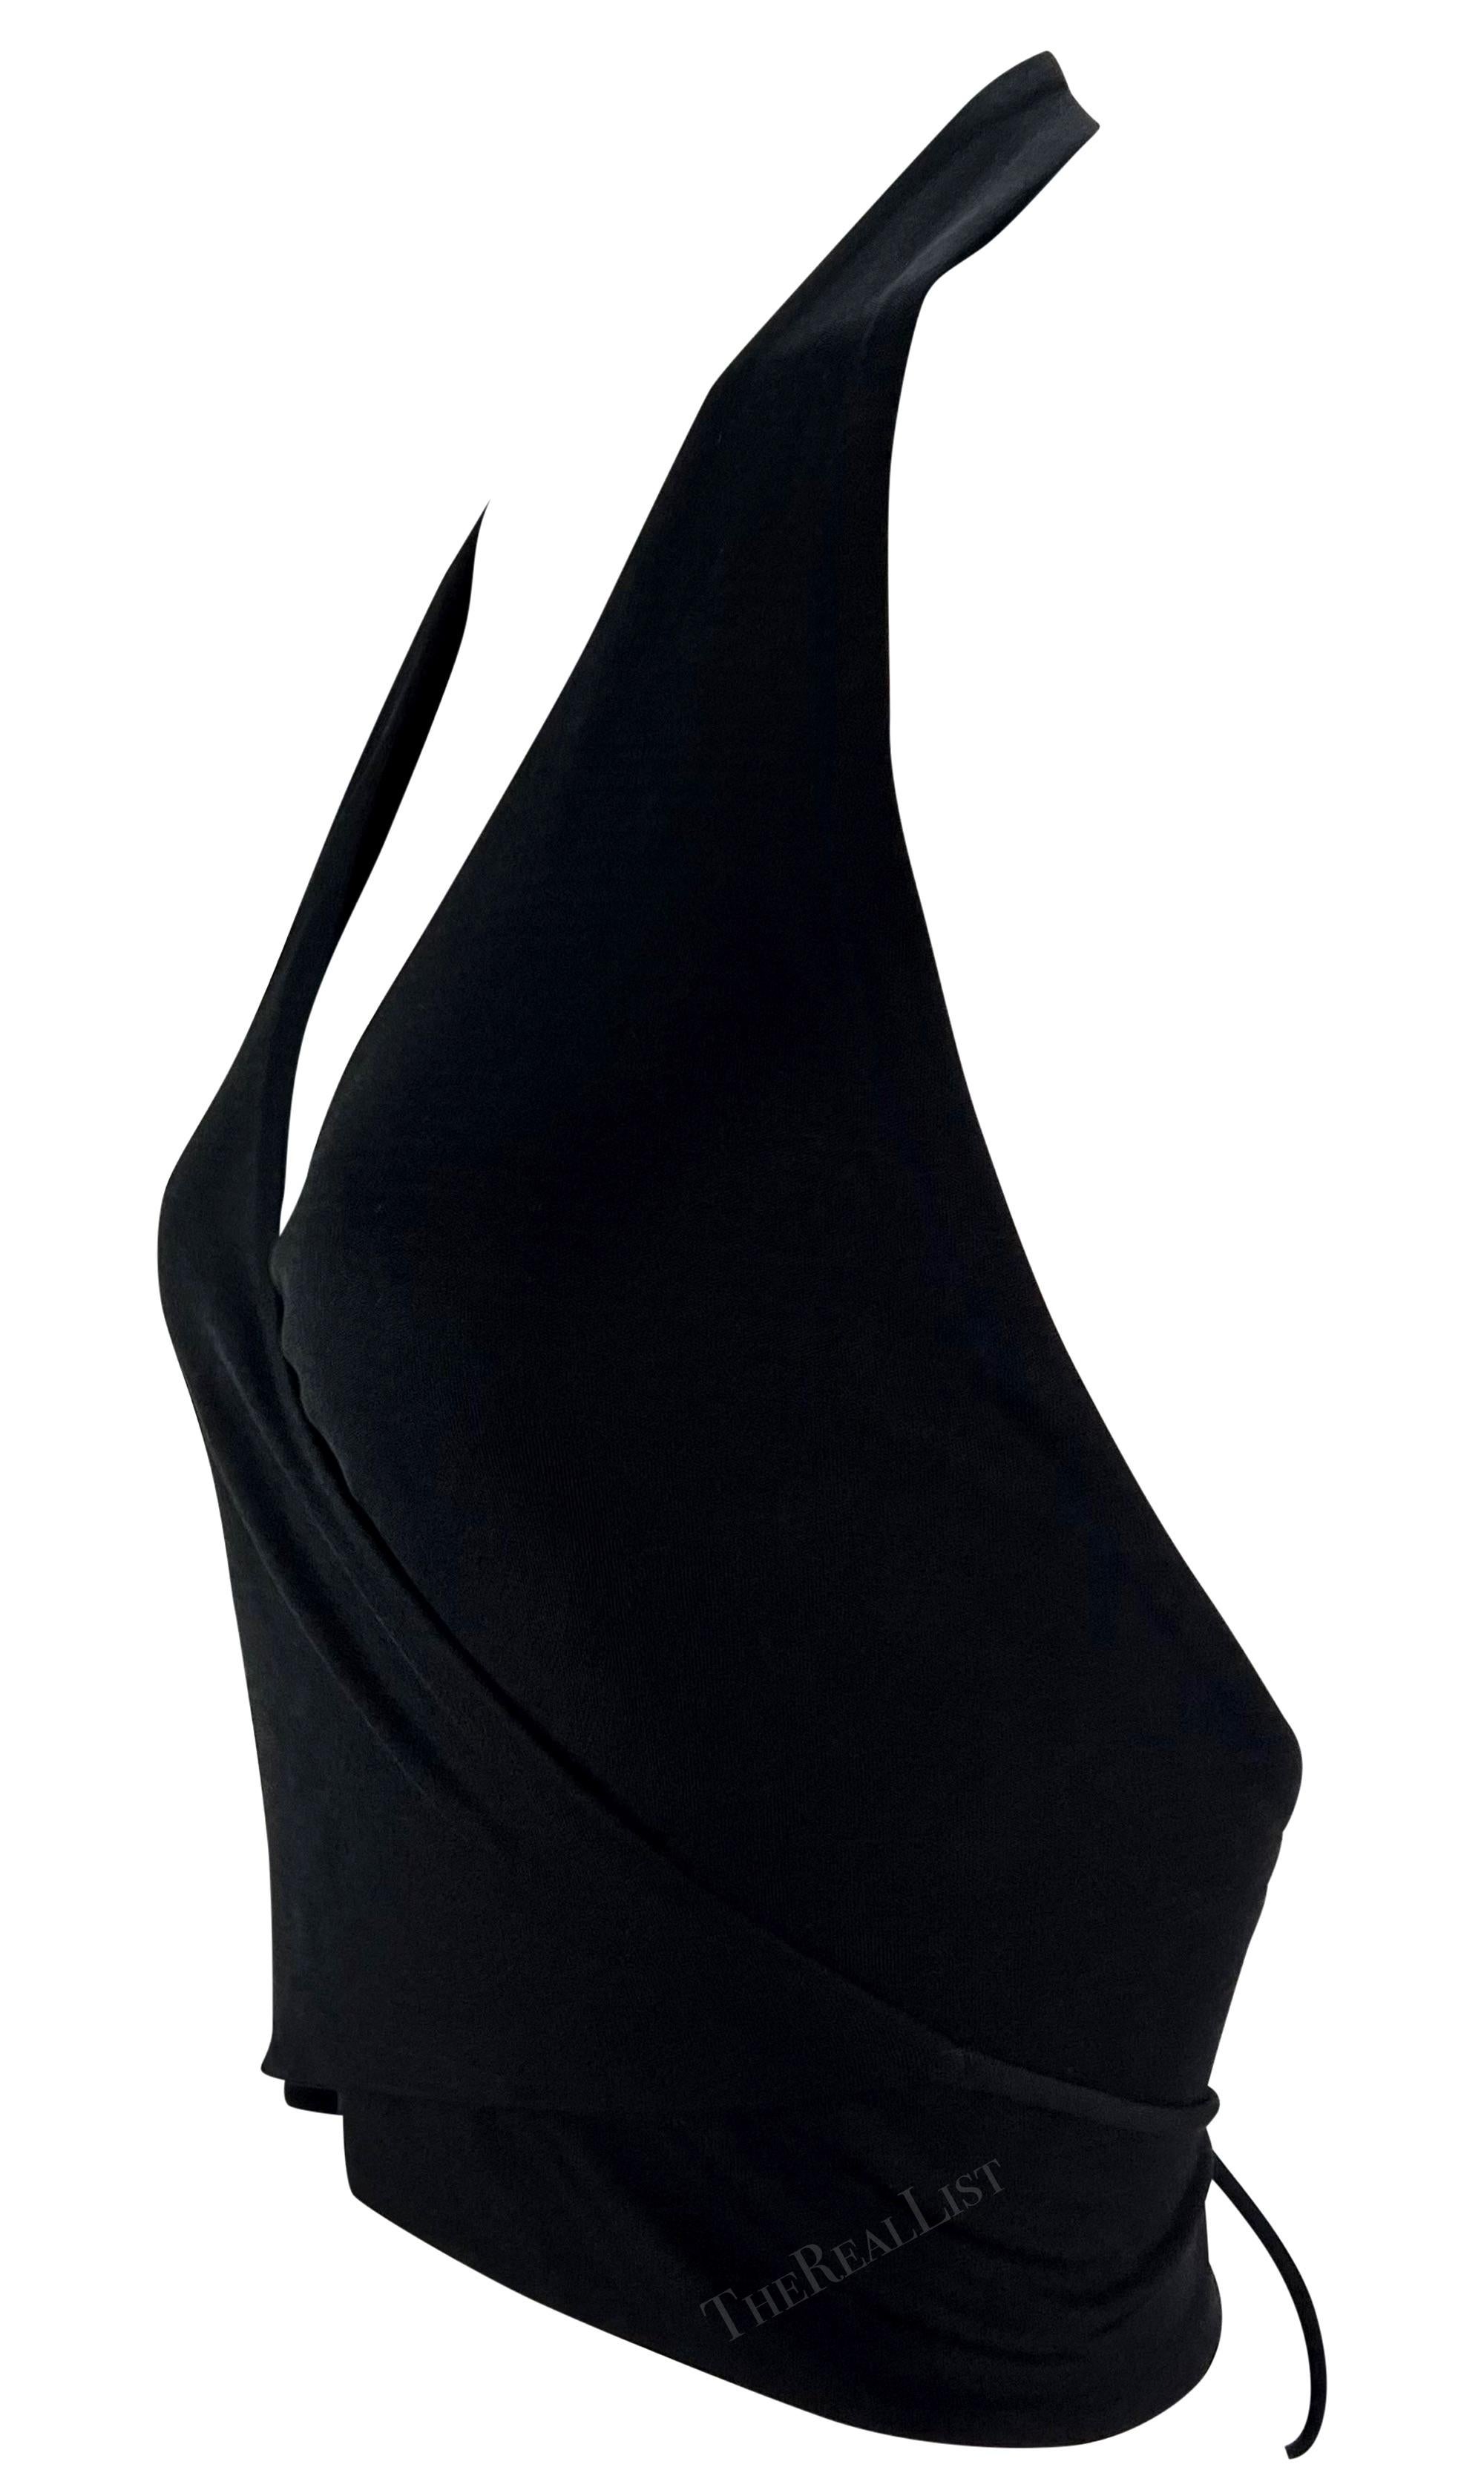 S/S 1997 Gucci by Tom Ford Black Silk Backless Wrap Halter Neck Wrap Top For Sale 2